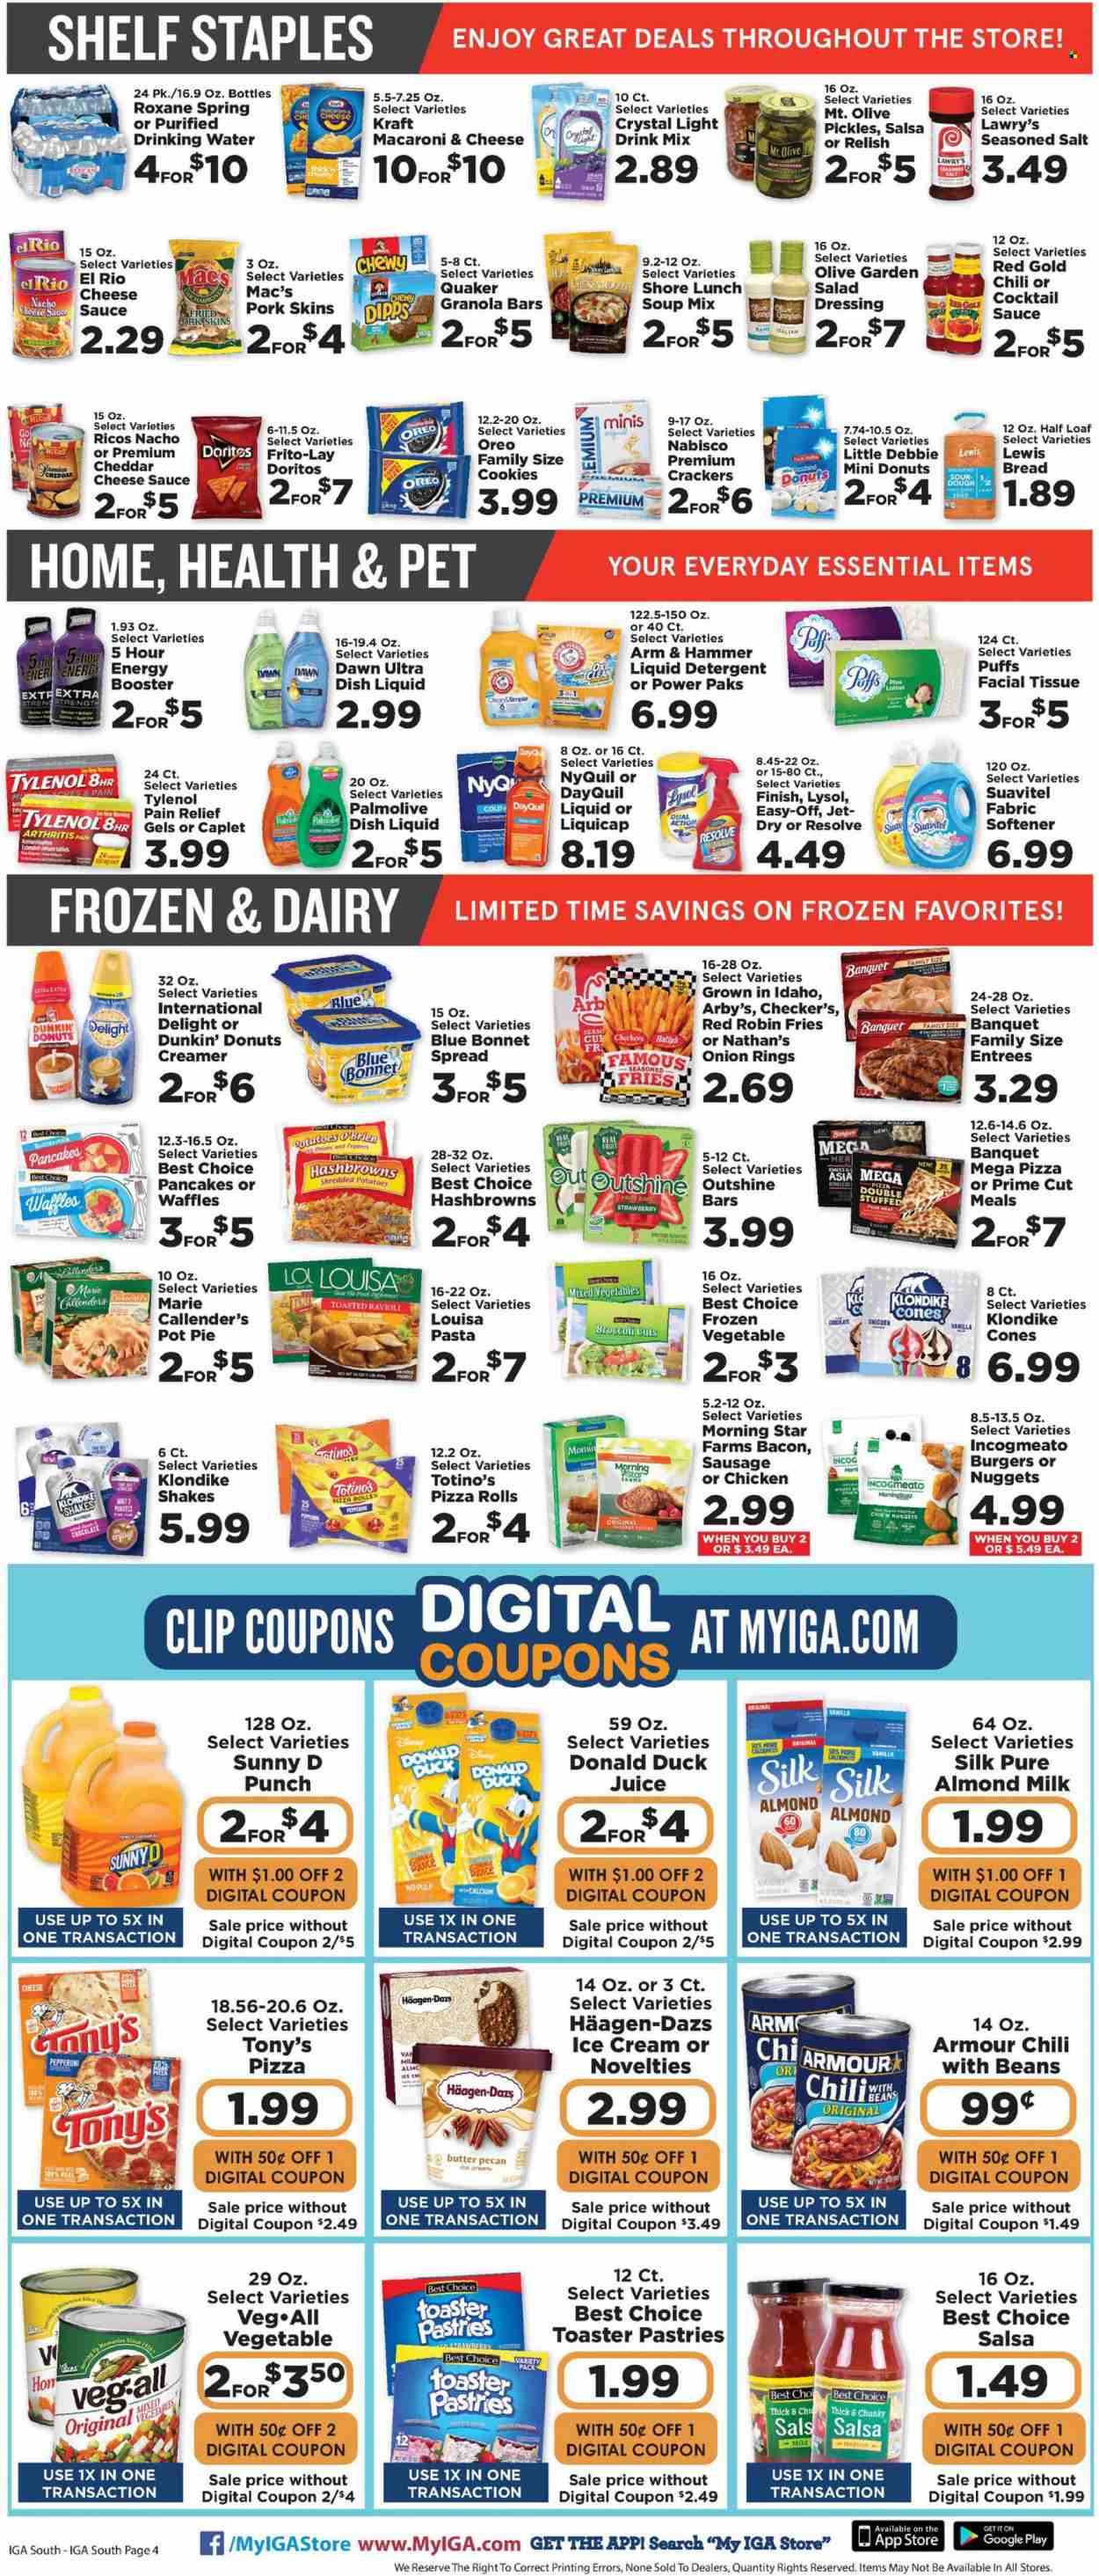 thumbnail - IGA Flyer - 01/19/2022 - 01/25/2022 - Sales products - bread, pie, pizza rolls, pot pie, puffs, donut, waffles, Dunkin' Donuts, broccoli, potatoes, oranges, macaroni & cheese, ravioli, pizza, onion rings, soup mix, soup, nuggets, hamburger, pasta, sauce, Quaker, Marie Callender's, Kraft®, bacon, sausage, pepperoni, Oreo, almond milk, buttermilk, shake, creamer, ice cream, Häagen-Dazs, mixed vegetables, hash browns, potato fries, cookies, crackers, Doritos, Frito-Lay, ARM & HAMMER, granola bar, spice, cocktail sauce, salad dressing, dressing, salsa, juice, punch, Mac’s, tissues, detergent, Lysol, fabric softener, liquid detergent, dishwashing liquid, Jet, Palmolive, pot, pain relief, calcium, DayQuil, Tylenol, NyQuil. Page 4.